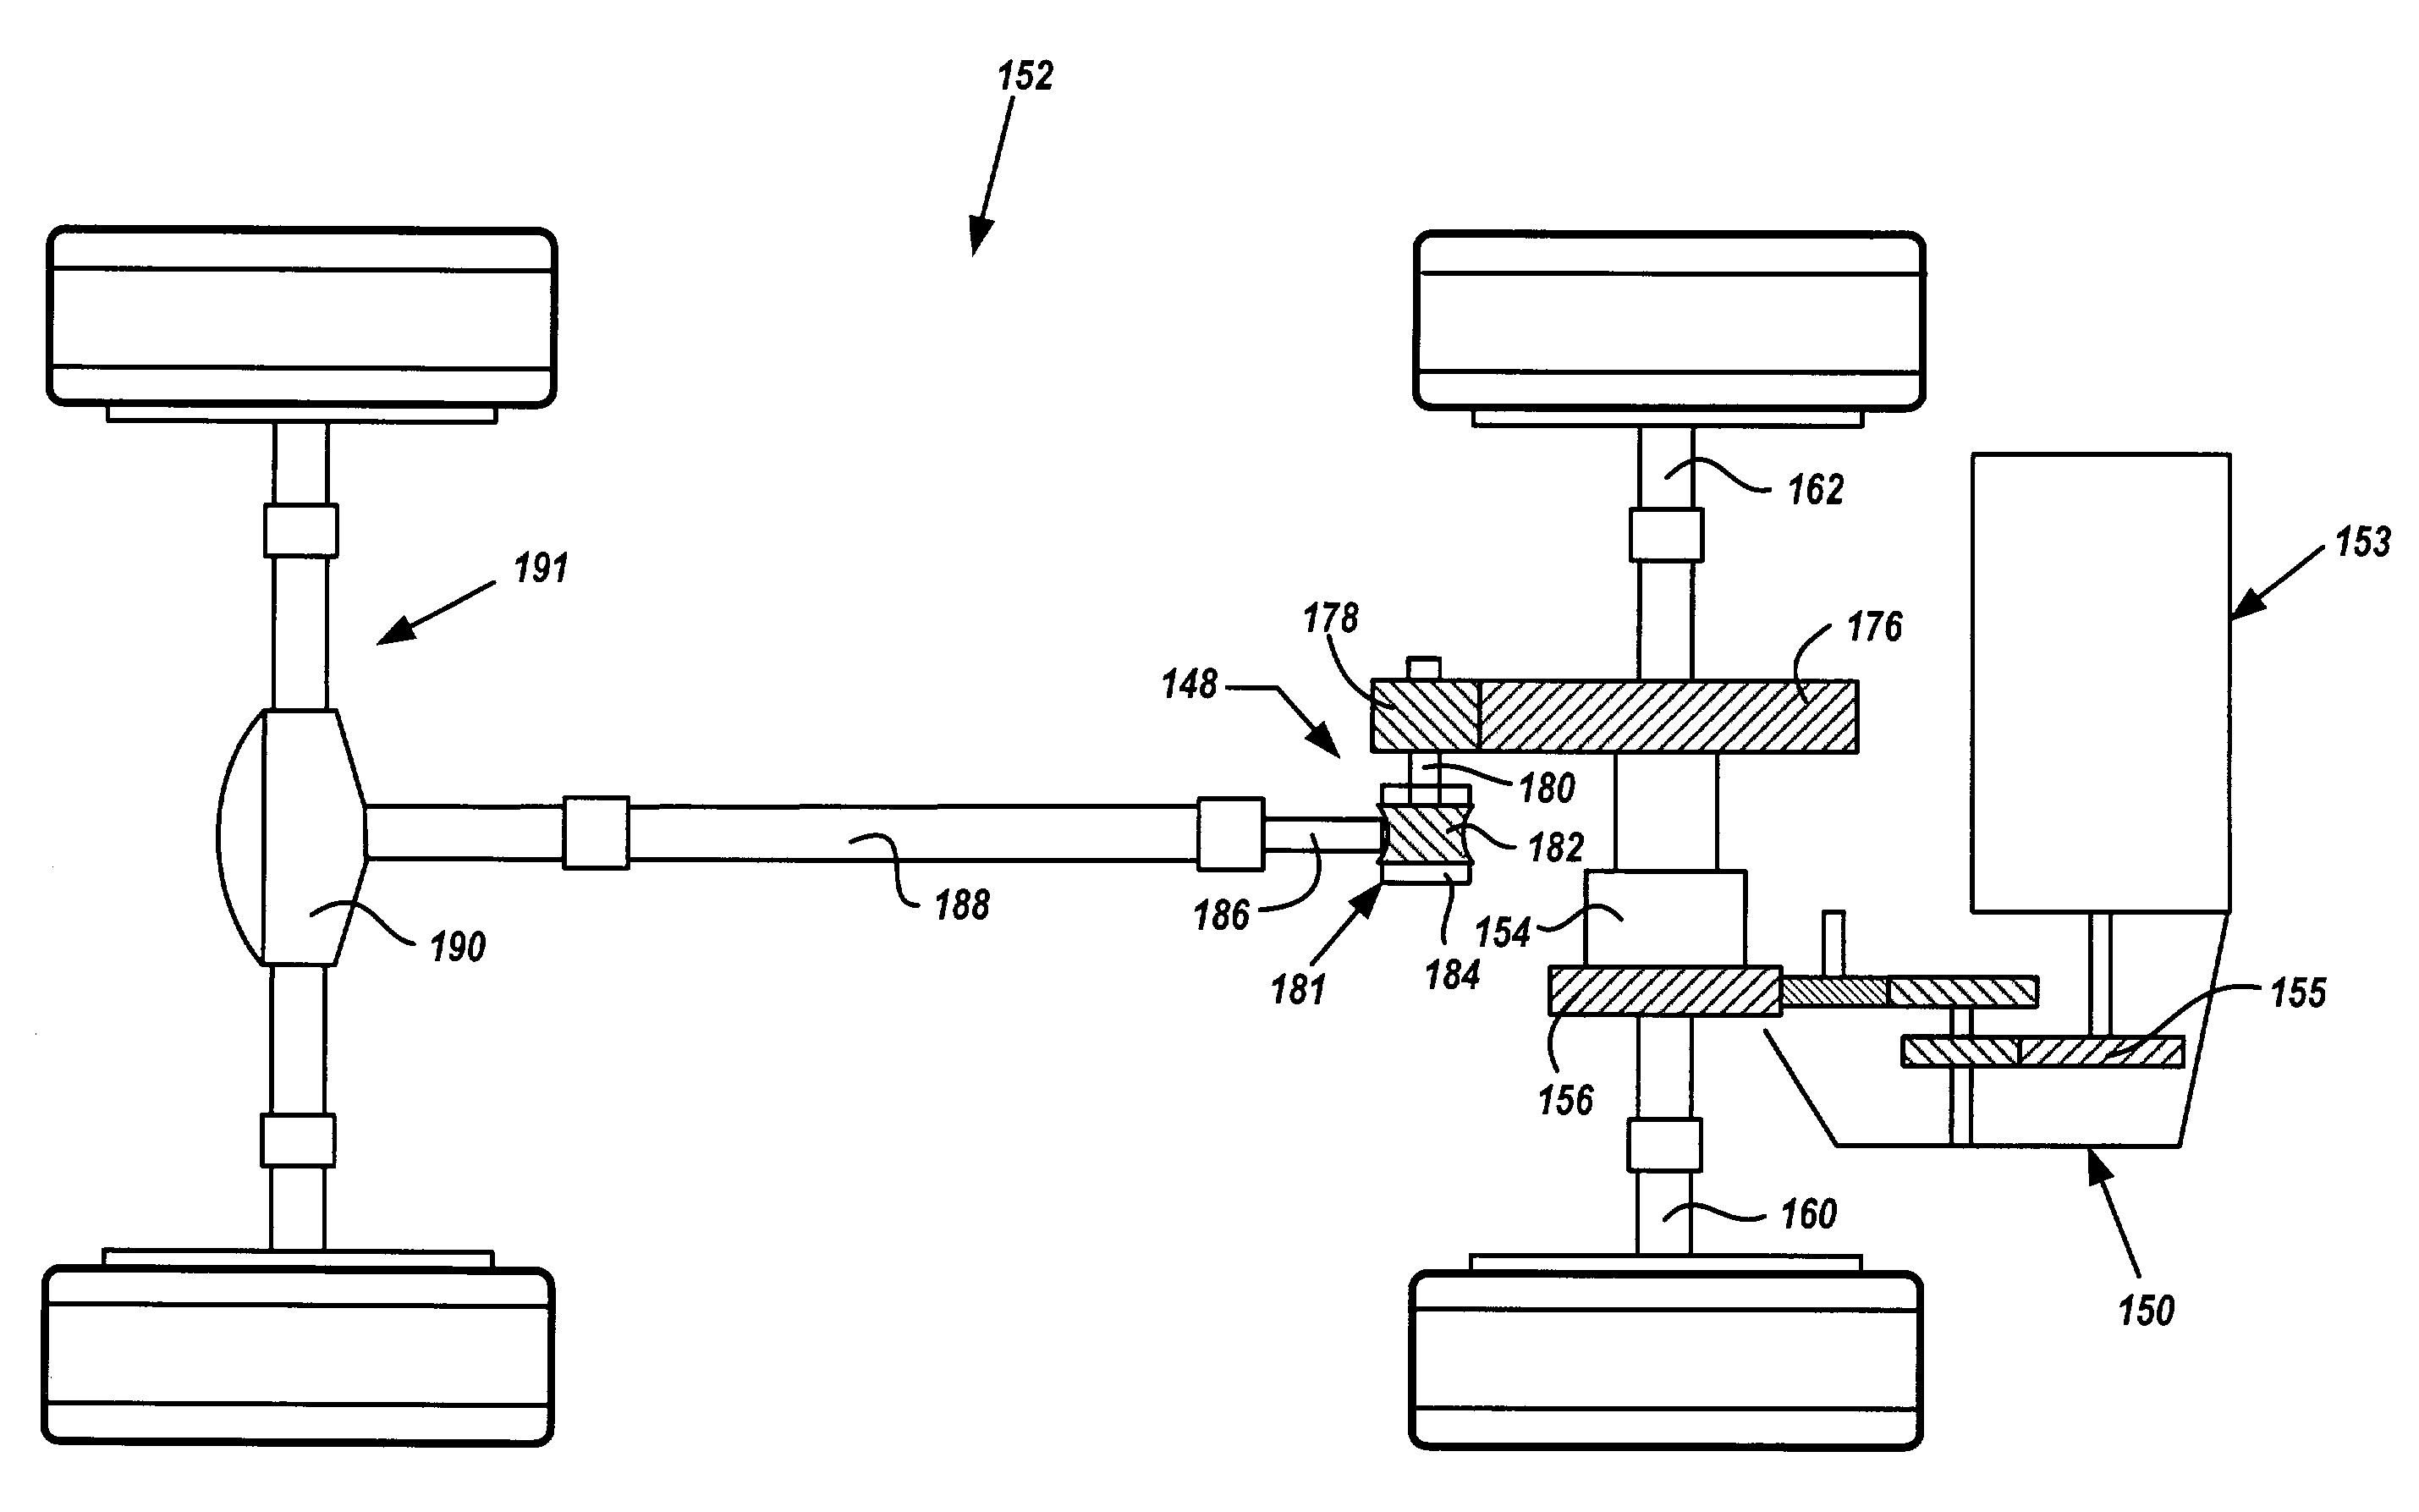 Power take-off unit with worm gearset